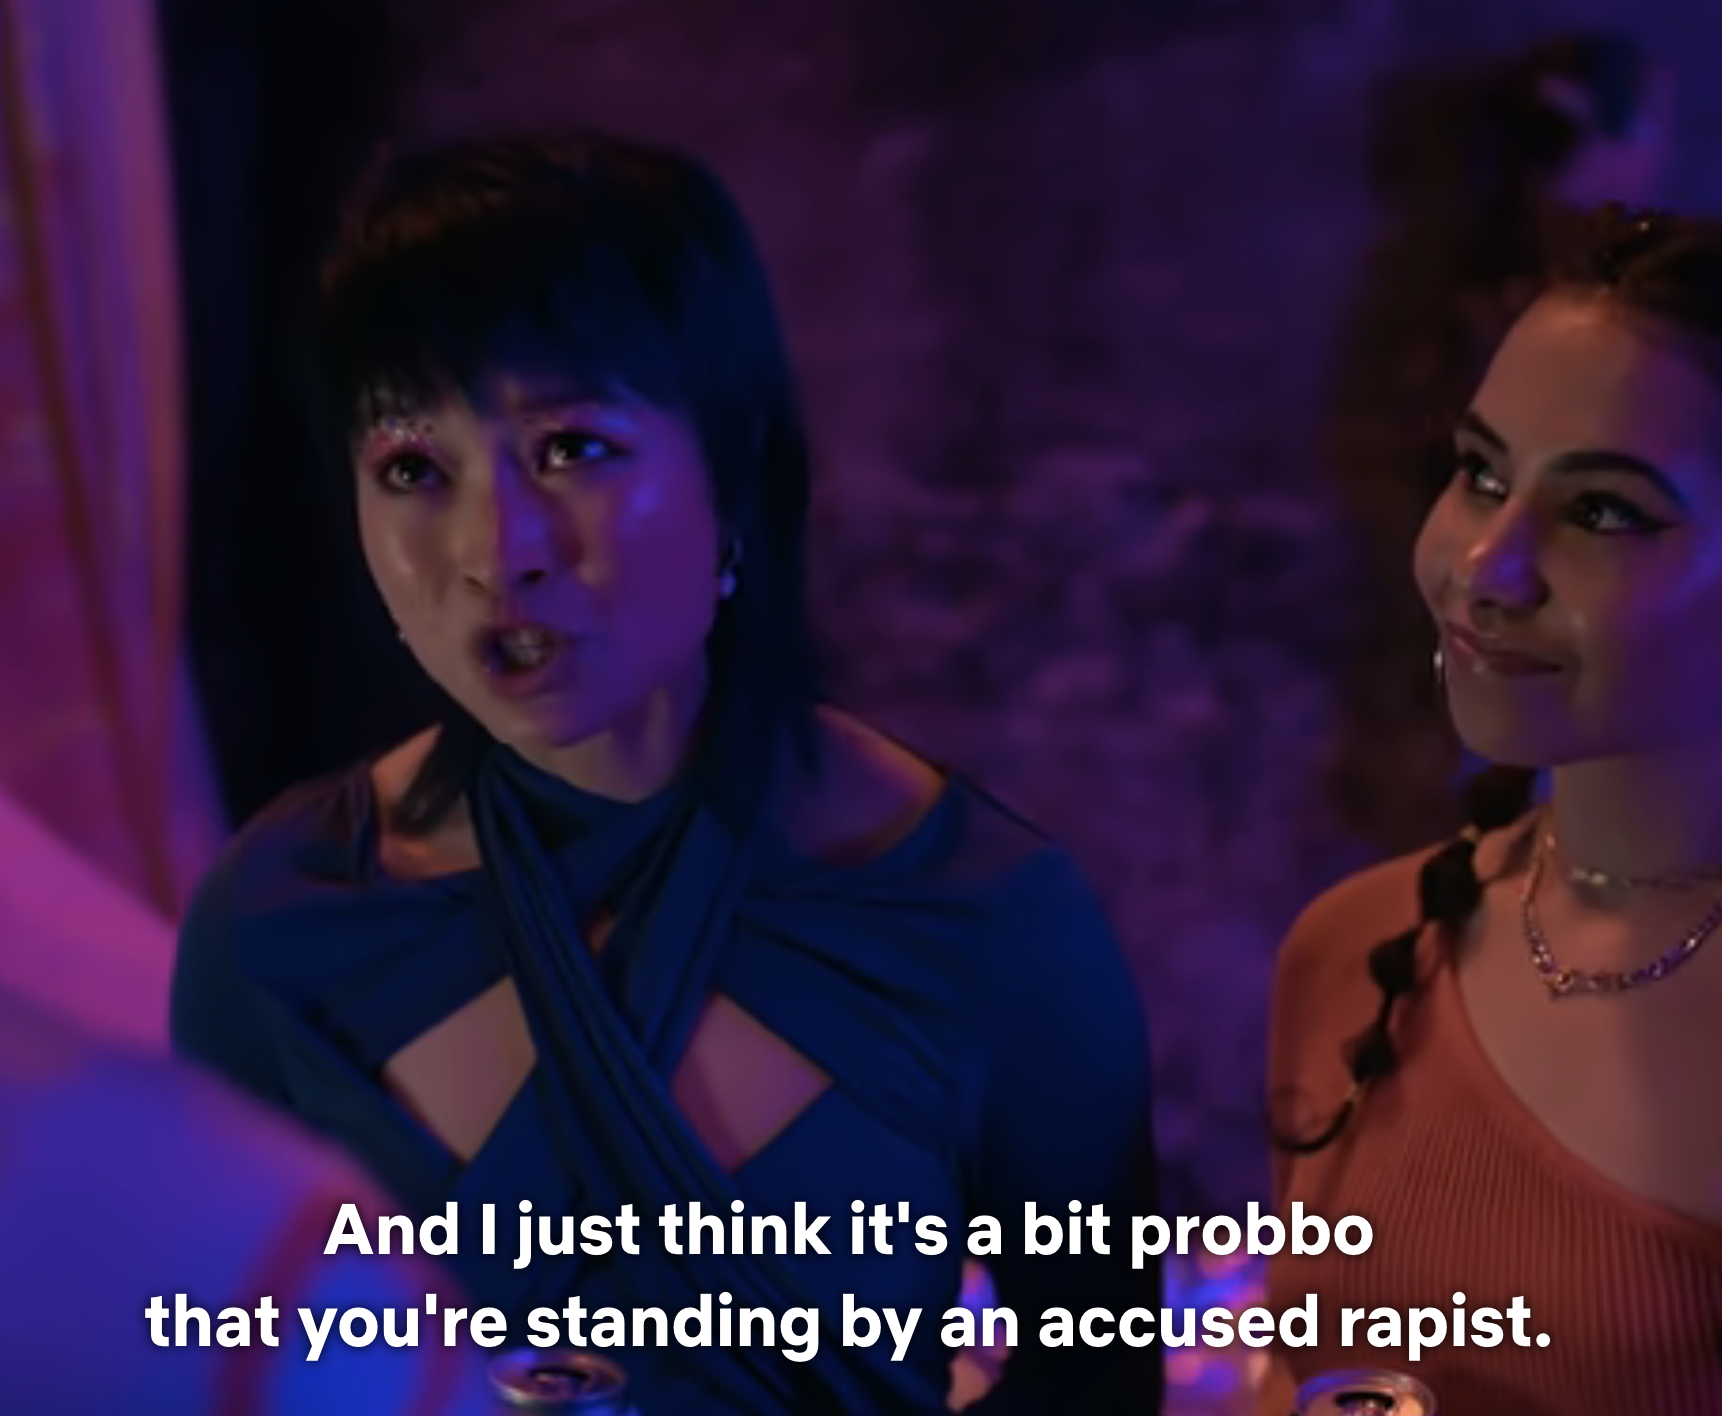 Two women talking, one wears a blue top, the other a brown dress. Subtitle: Expressing concern about supporting an accused person